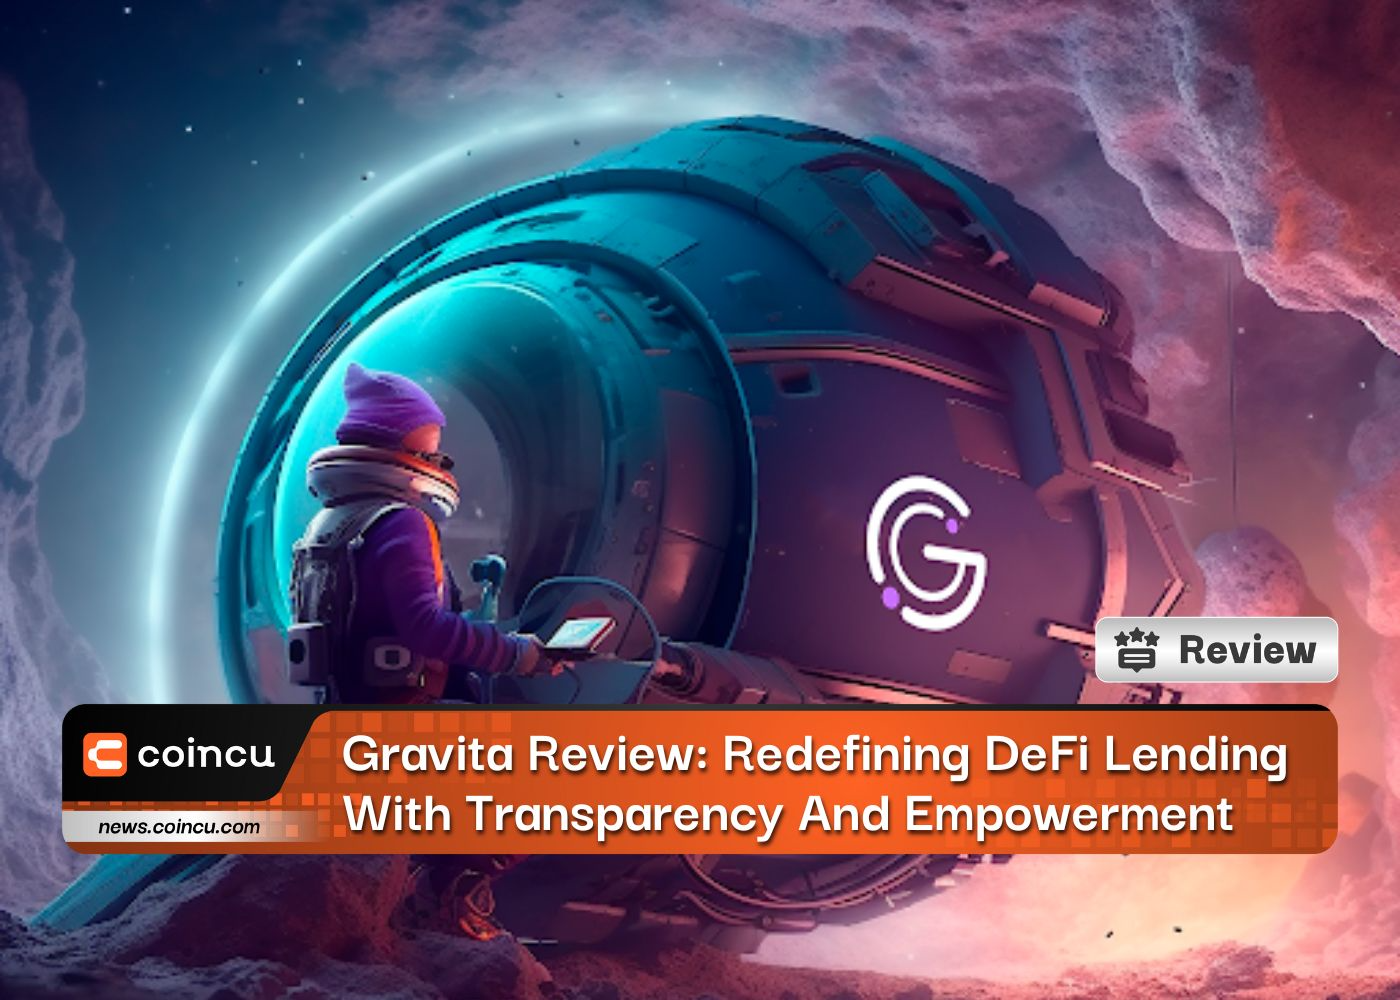 Gravita Review: Redefining DeFi Lending With Transparency And Empowerment